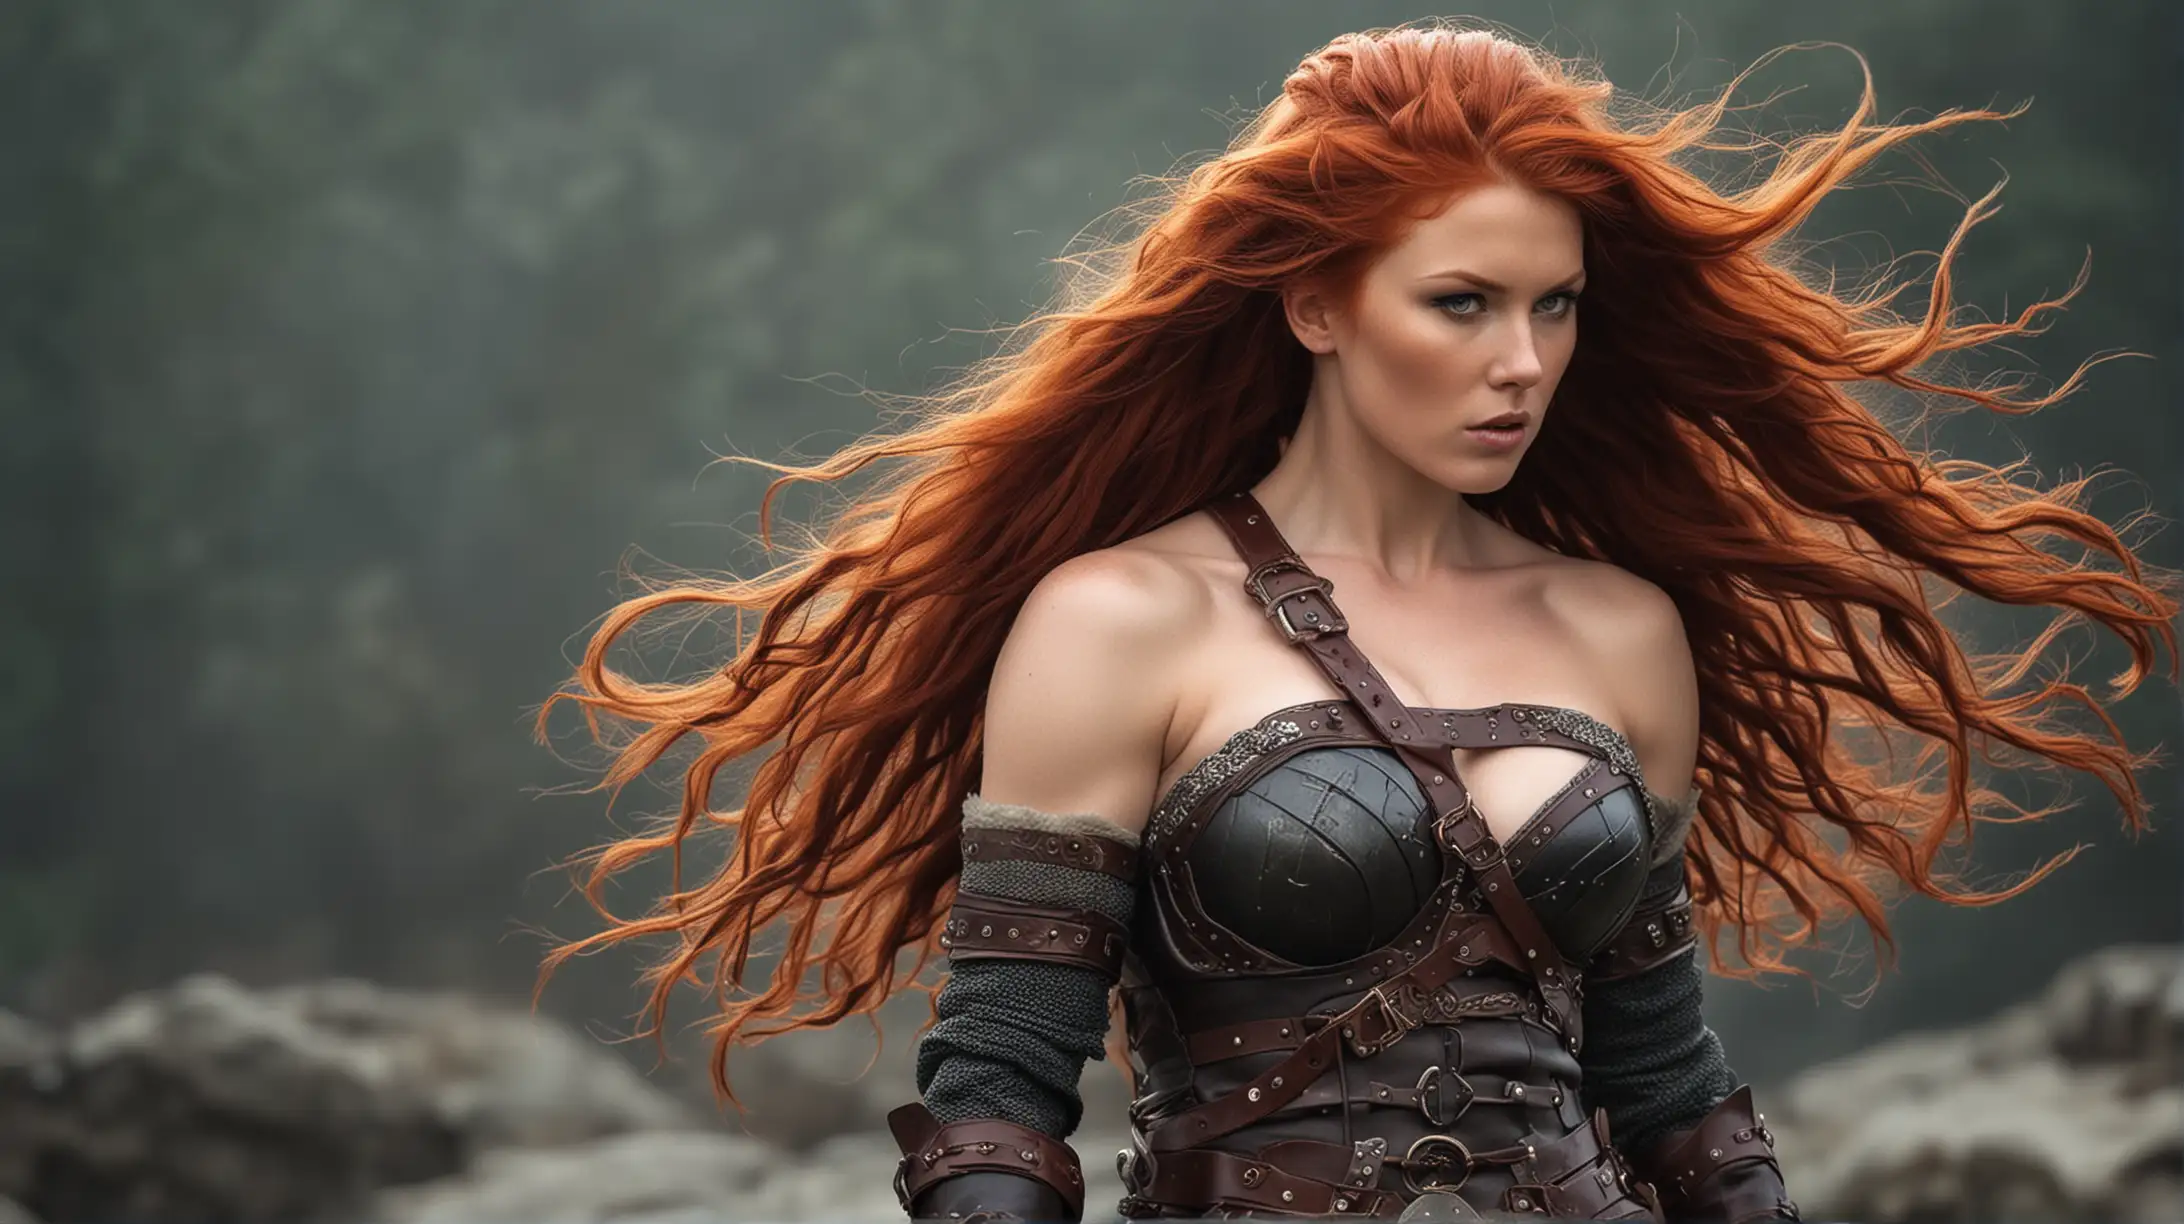 Bold Redhead Viking Warrior Princess with Empowering Abs and Majestic Hair